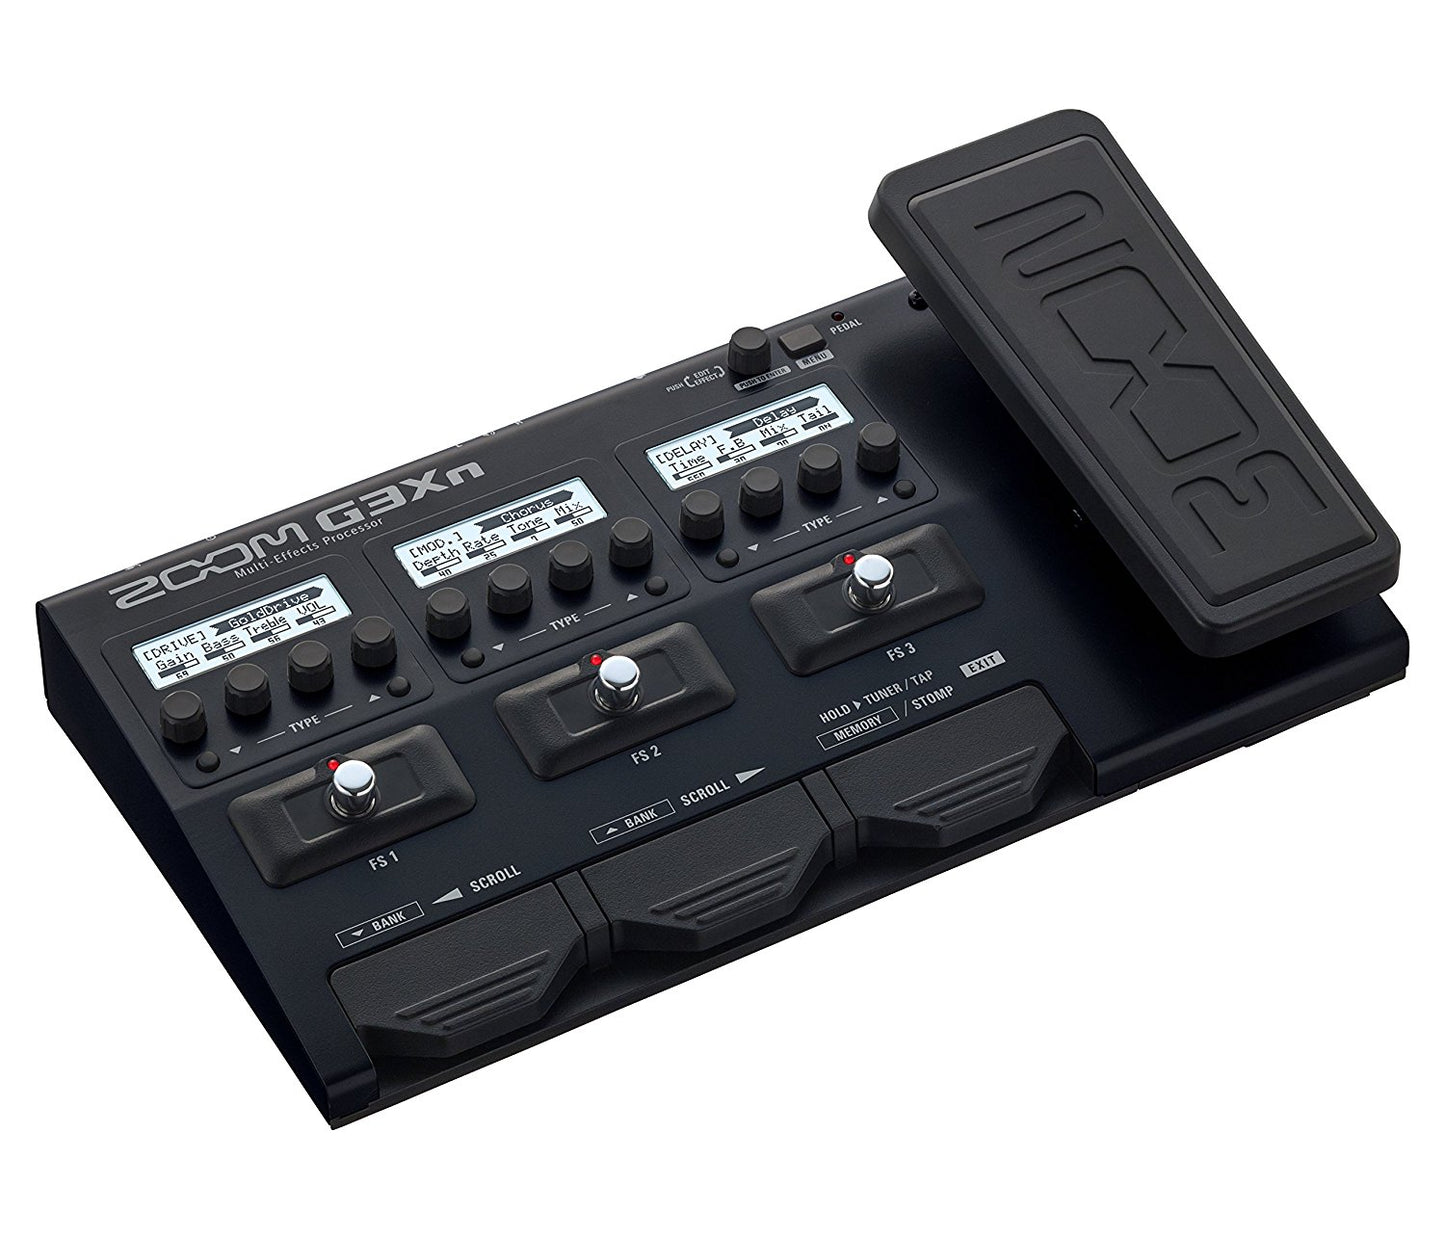 Zoom G3Xn Multi-Effects Processor with Expression Pedal for Guitarists